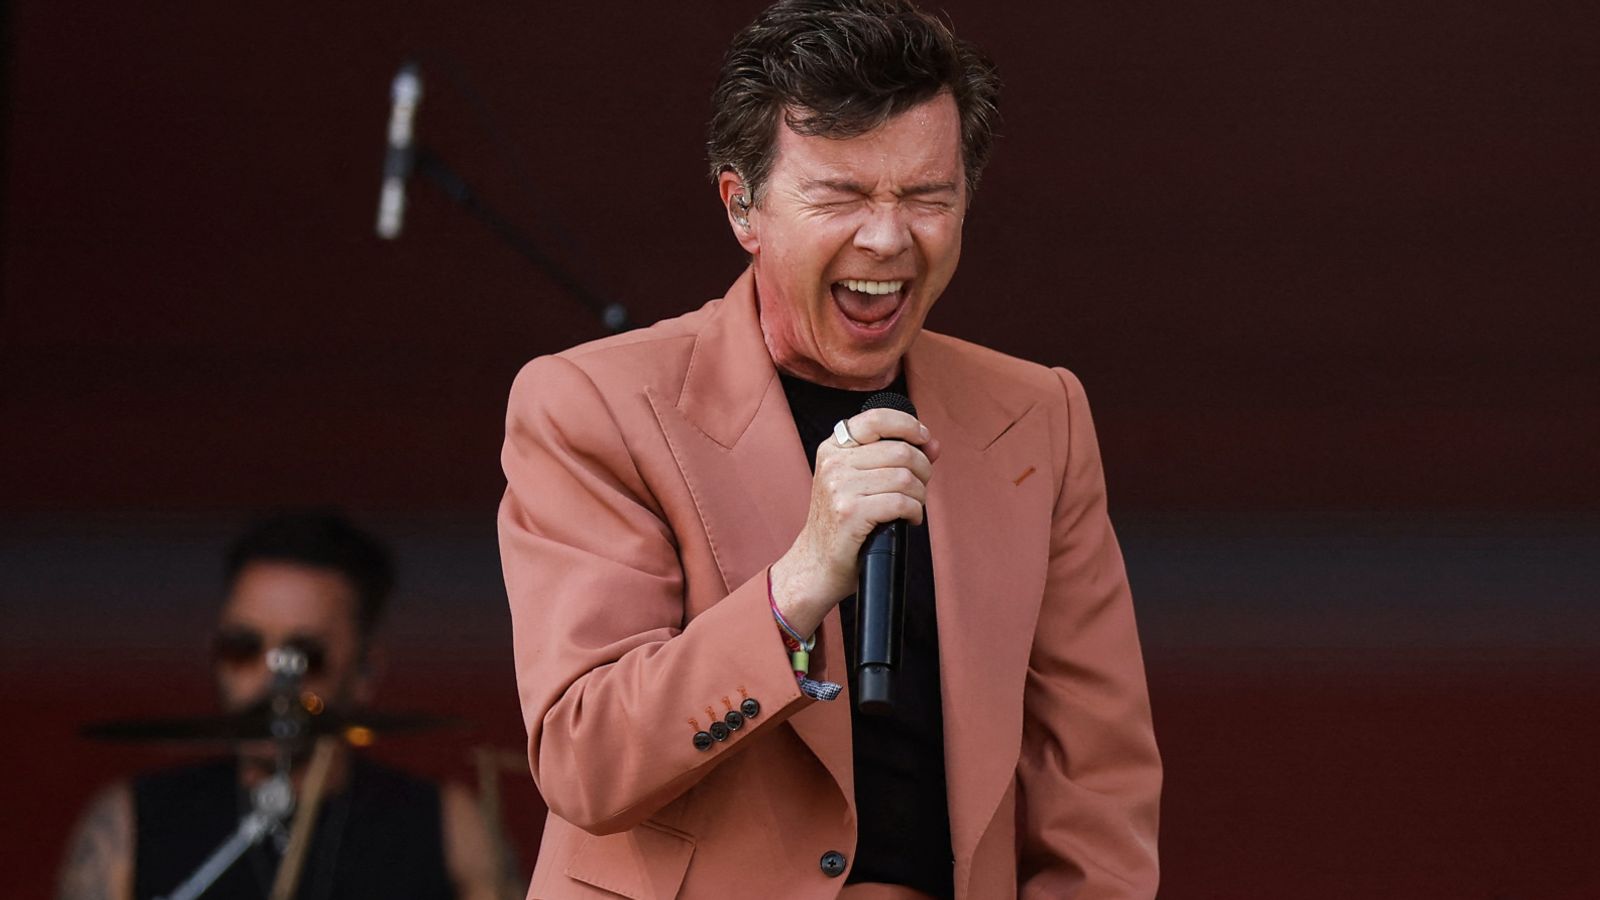 Rick Astley no longer a 'Glastonbury virgin' as he plays the Pyramid Stage